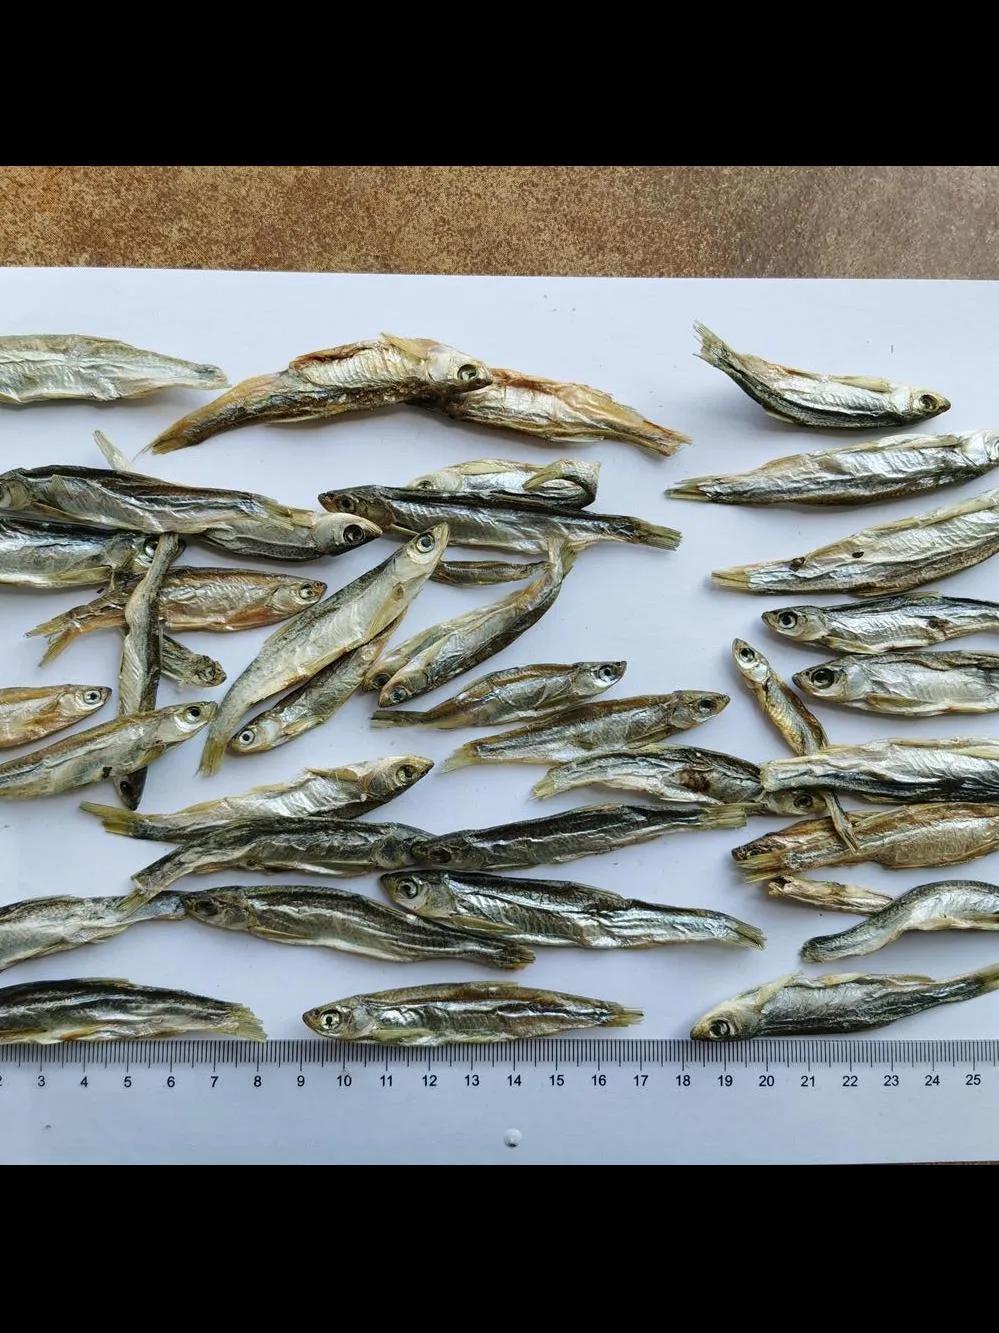 Chinese Supplier SD River Fish for Dogs/Cats/Turtles/Ornamental Fish Feeding